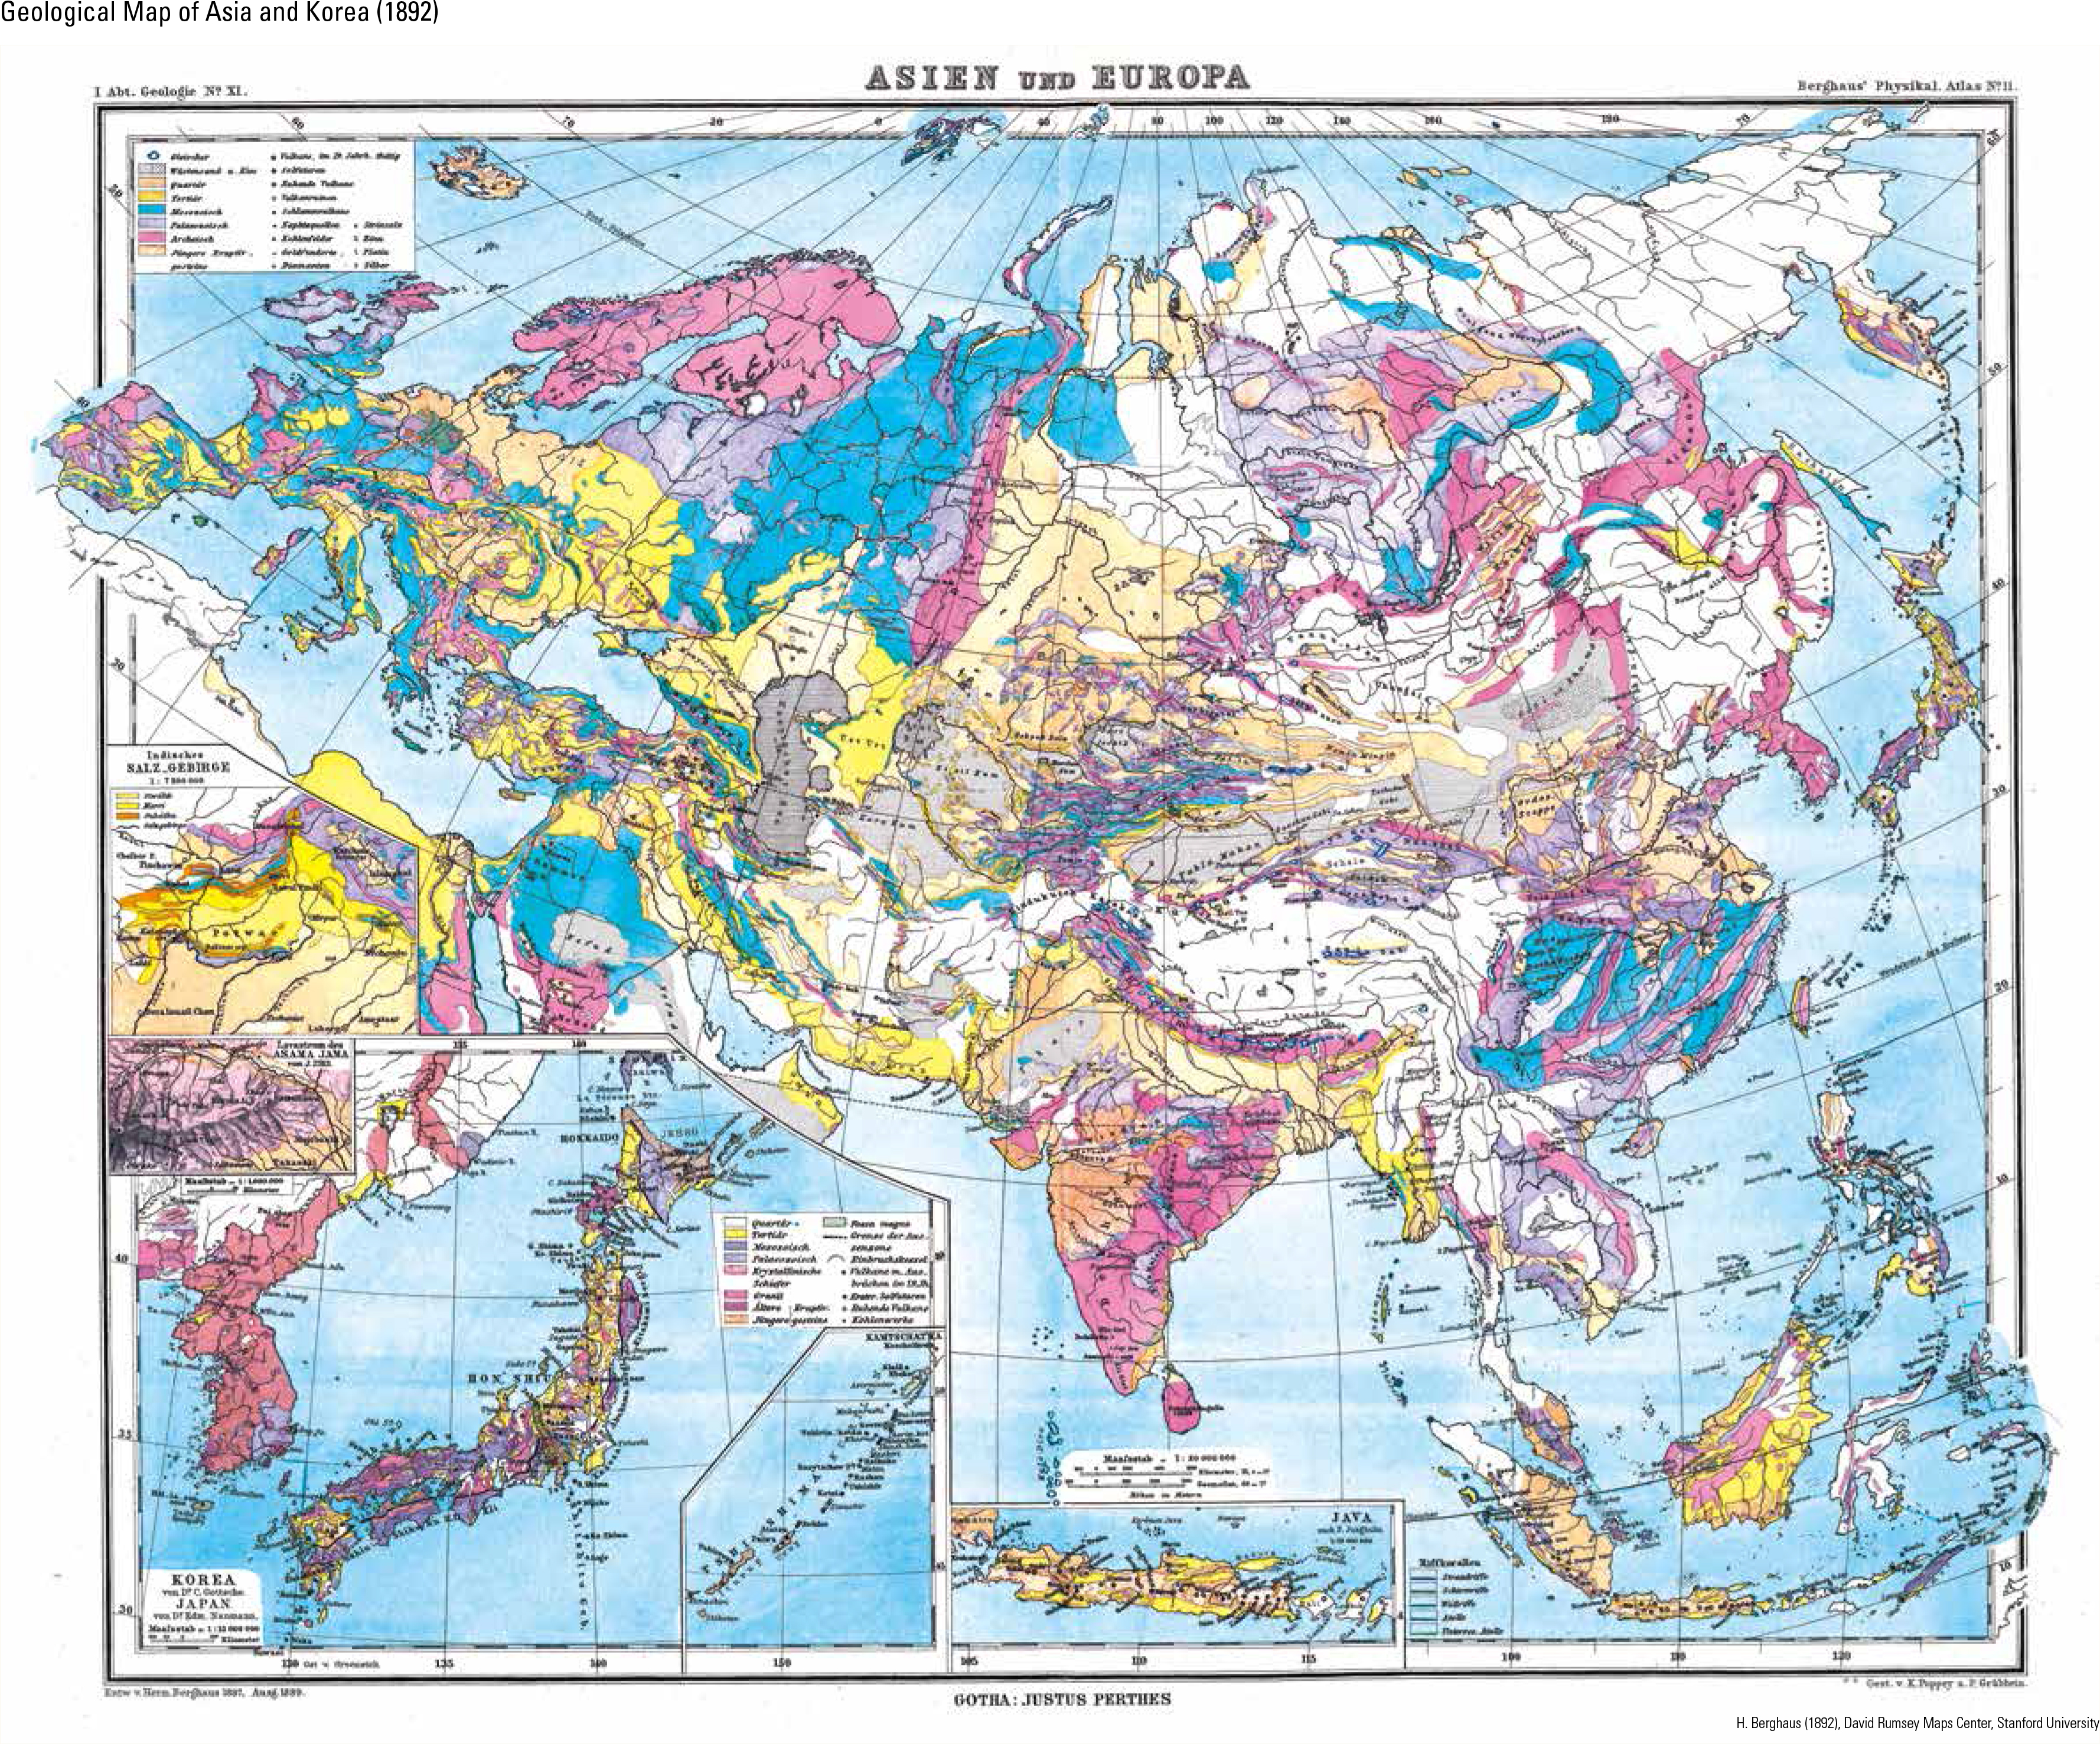  Geological Map of Asia and Korea (1892)